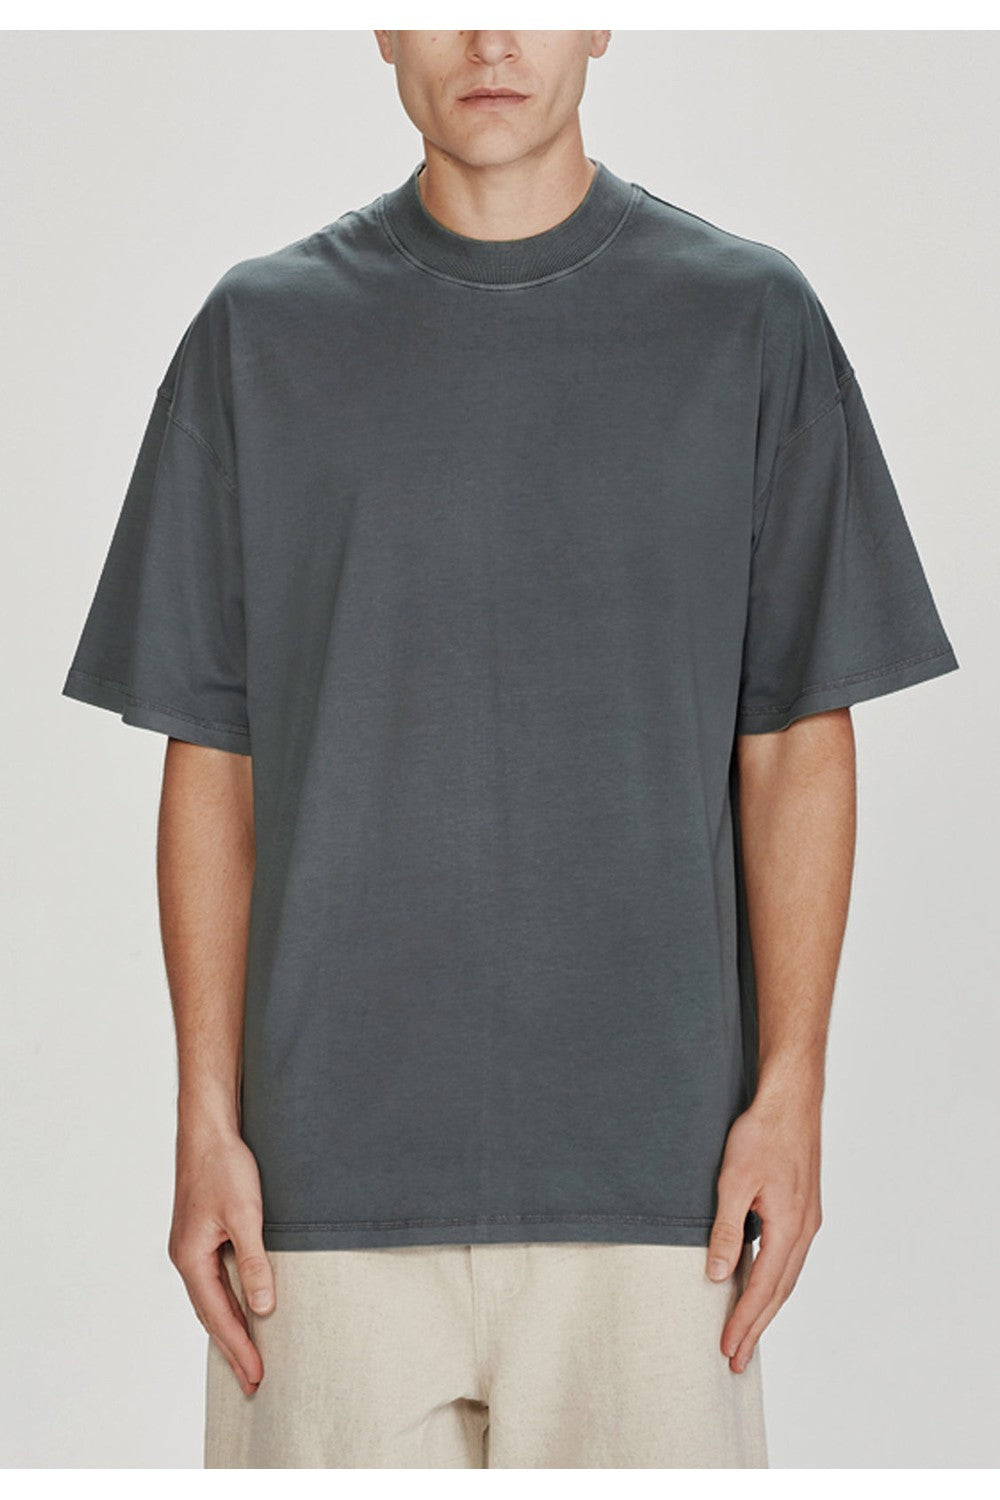 Mens Oversized Tee - Vintage Stormy | COMMONERS | Mad About The Boy